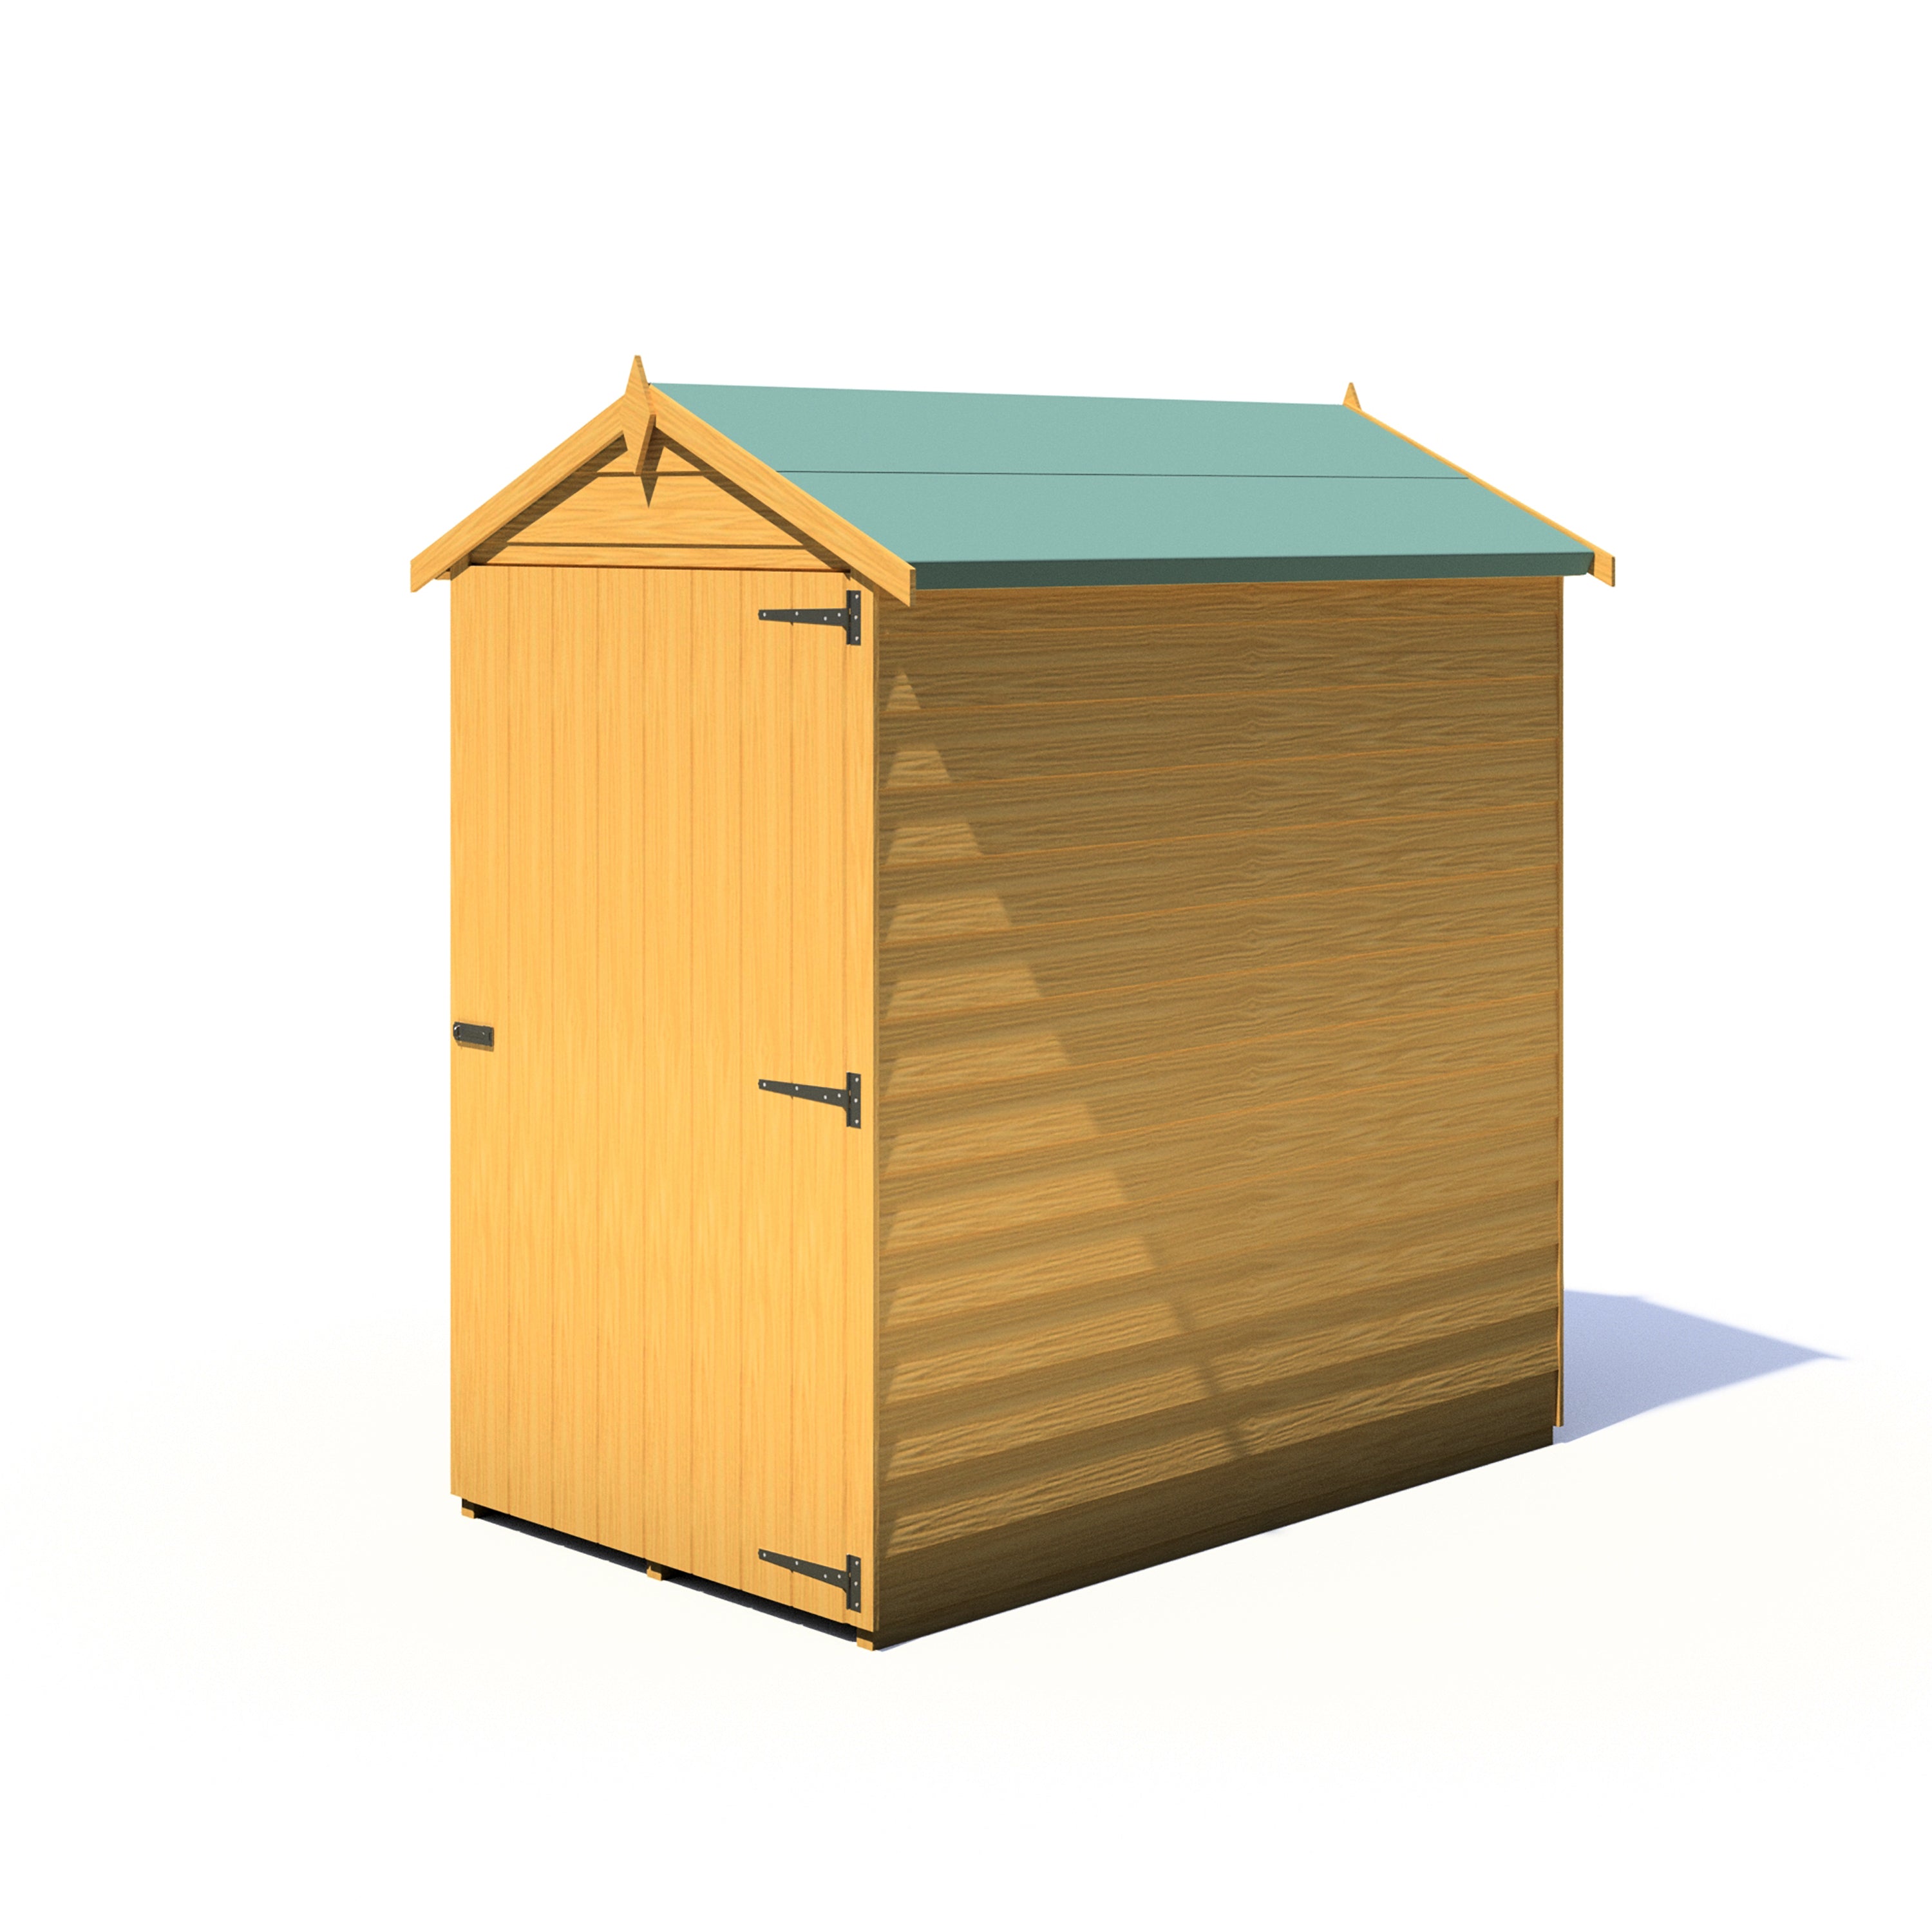 Shire Overlap Dipped Apex Wooden Garden Shed With Single Door 3x5